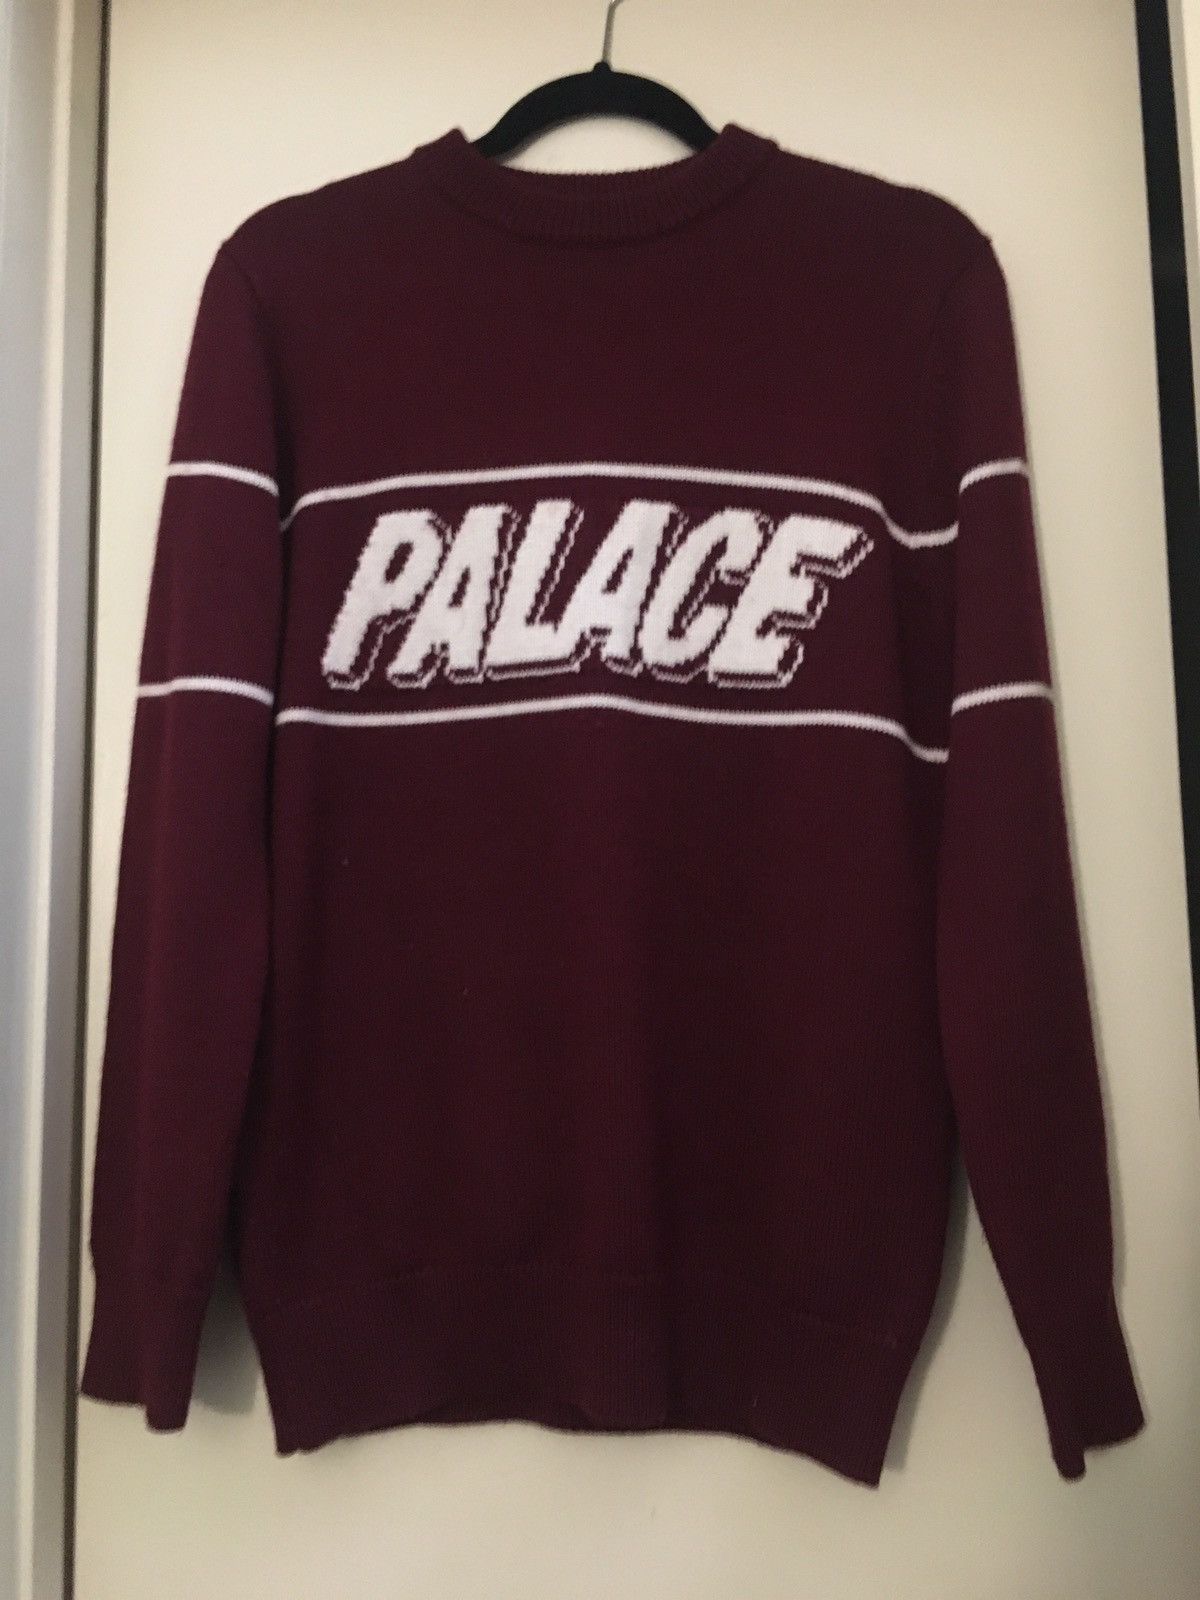 Palace Preppy palace sweater Size US S / EU 44-46 / 1 - 1 Preview